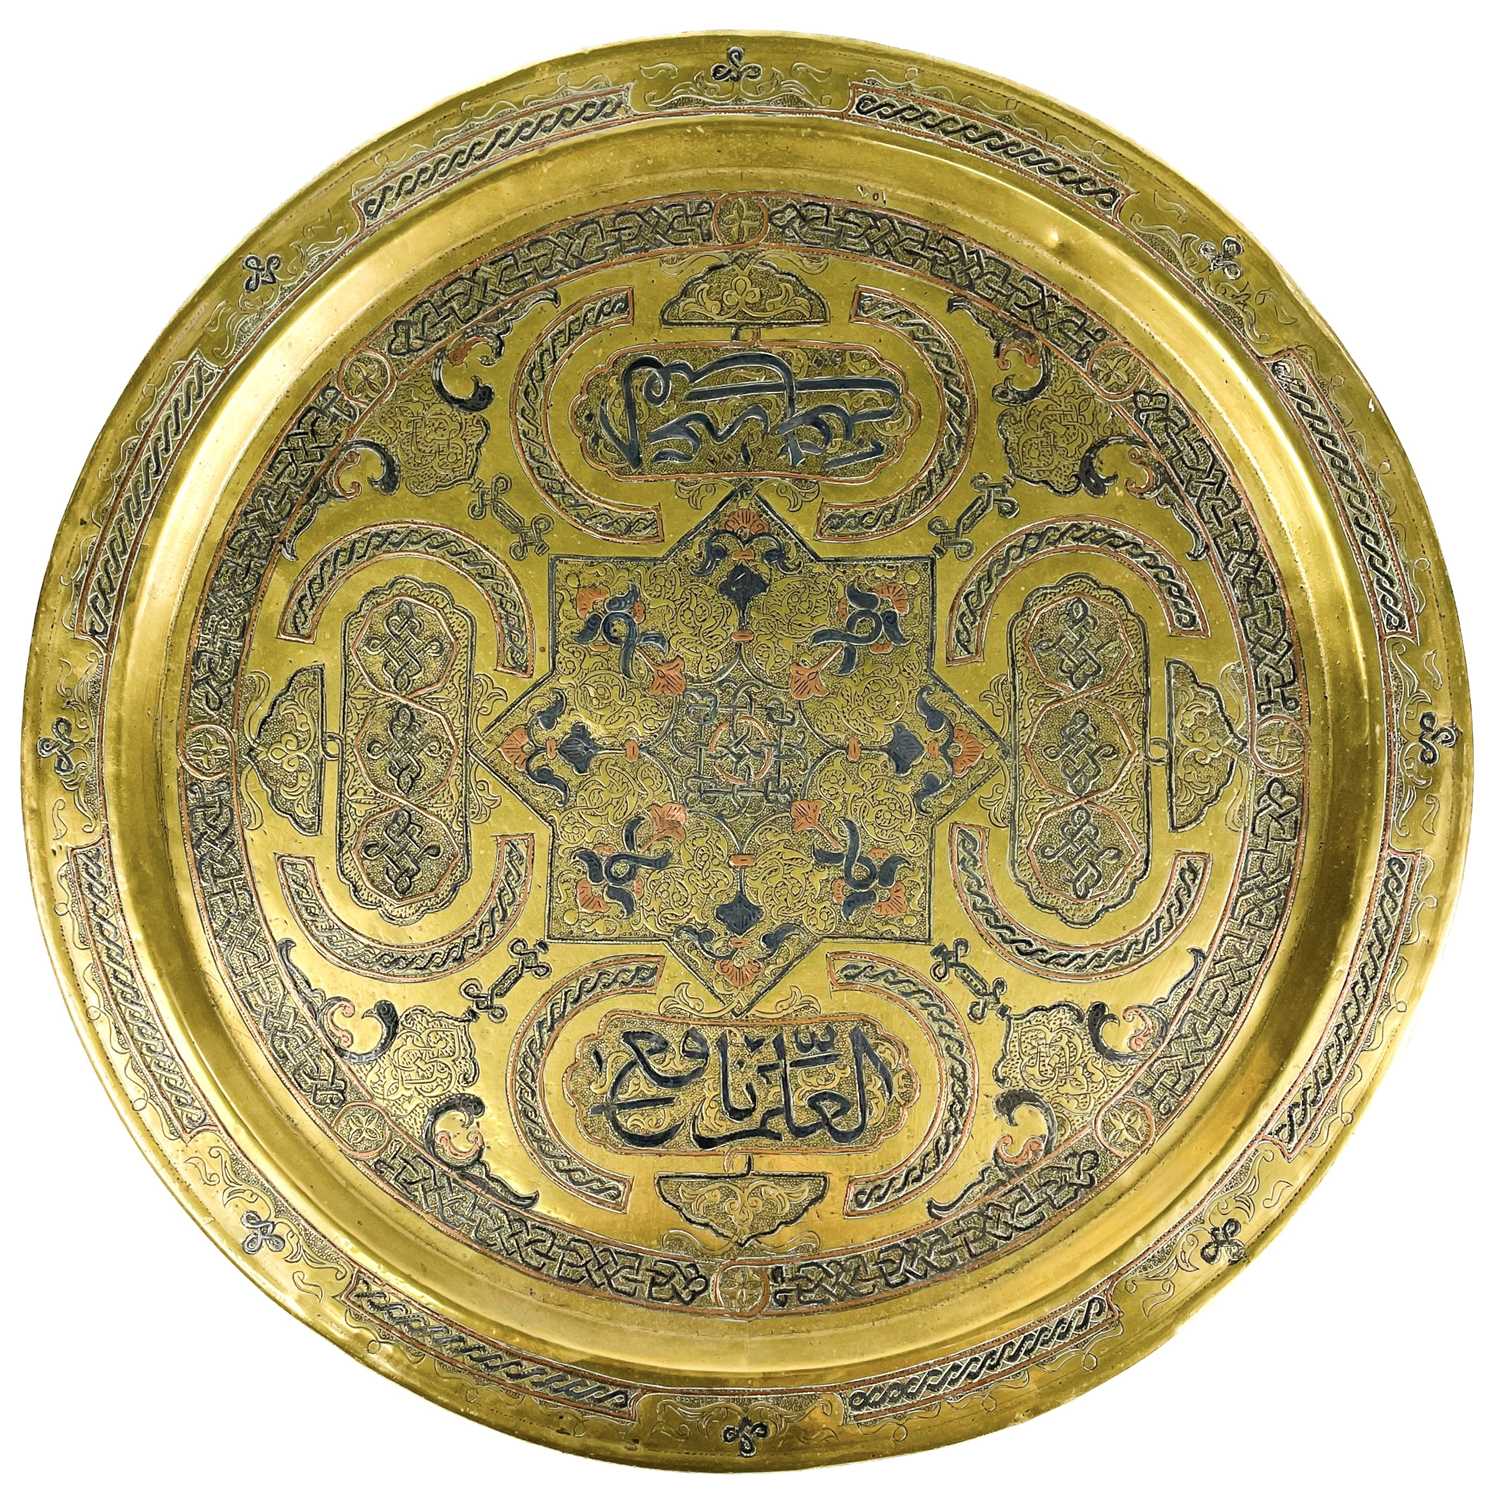 Lot 8 - An Islamic brass and silver inlaid tray, 19th century